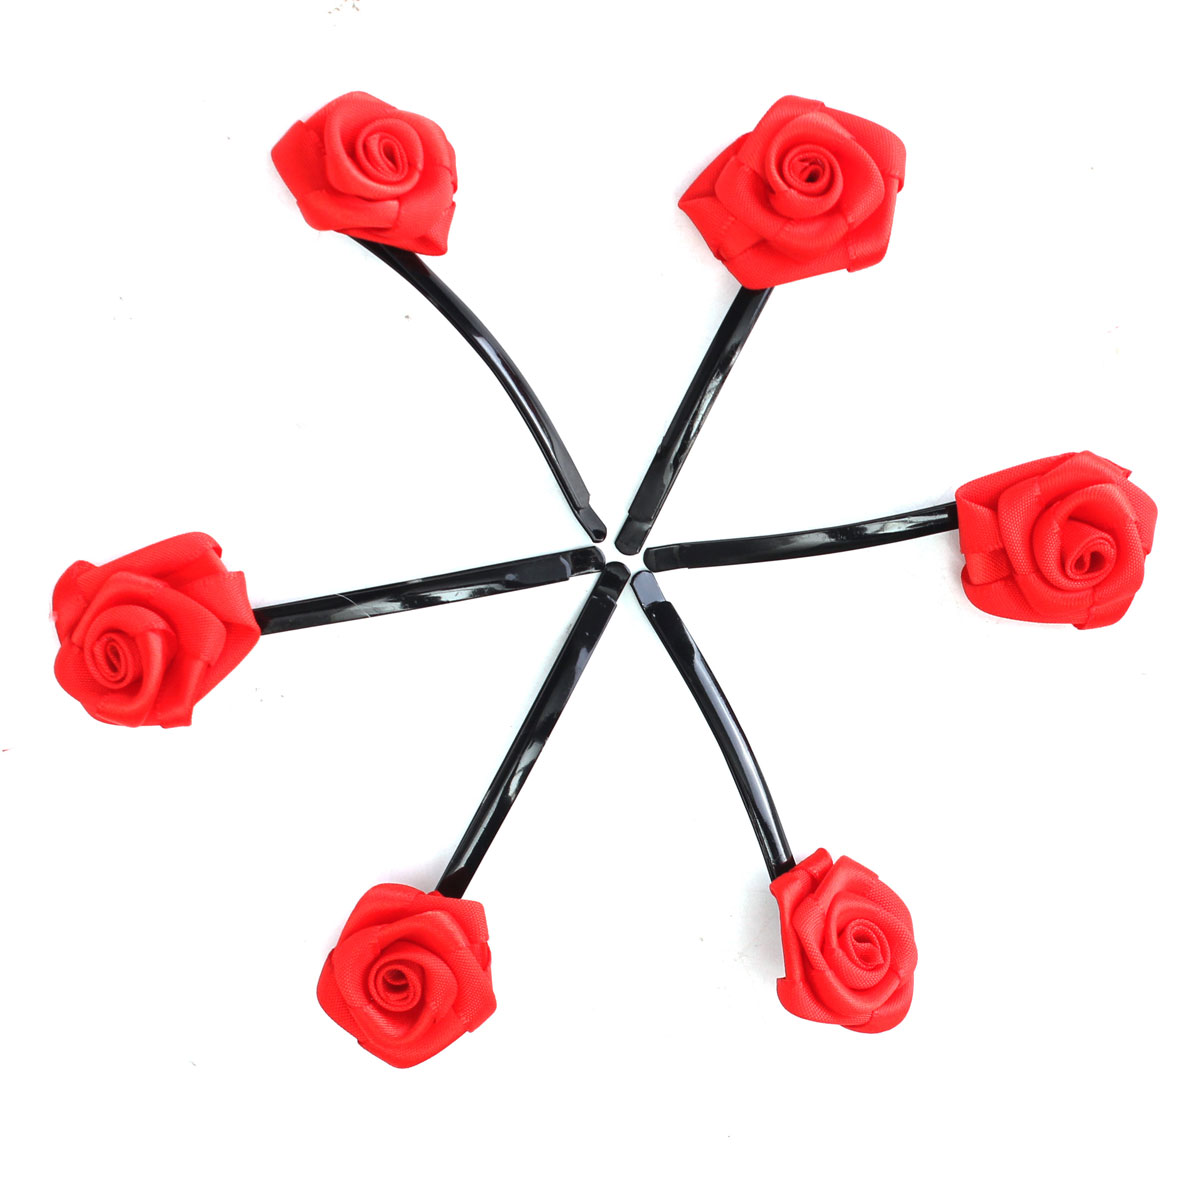 6pcs-Rose-Flowers-Hair-Pins-Grips-Clips-Accessories-for-Wedding-Party-1037583-10